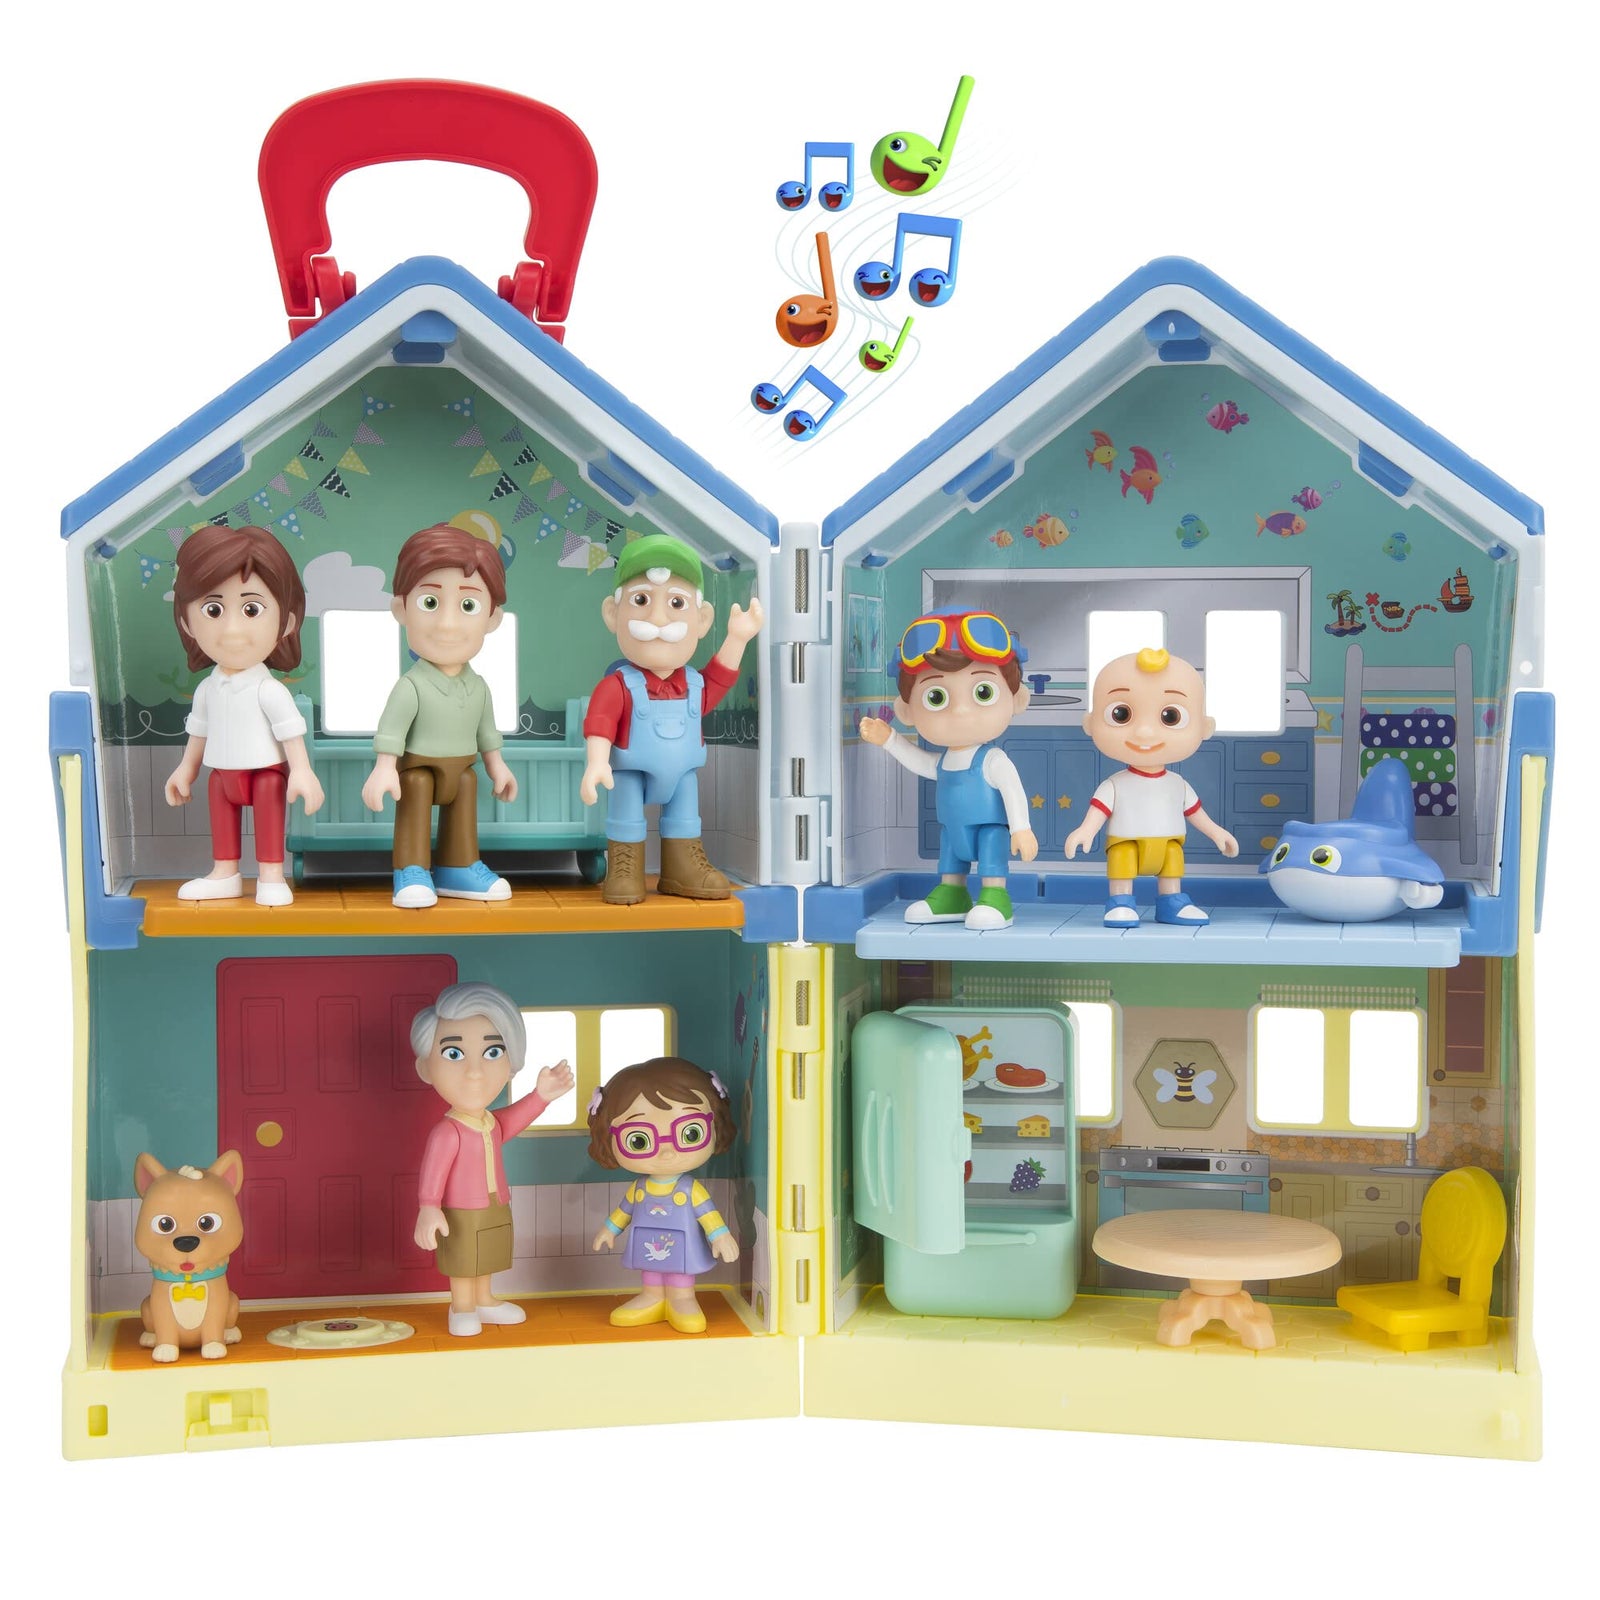 CoComelon Deluxe Family House Playset with Music and Sounds - Includes JJ, Family, Friends, Shark Potty, Crib, Sofa, Chair, High Chair, Dining Room Table, Fridge, Activity Sheet - Amazon Exclusive